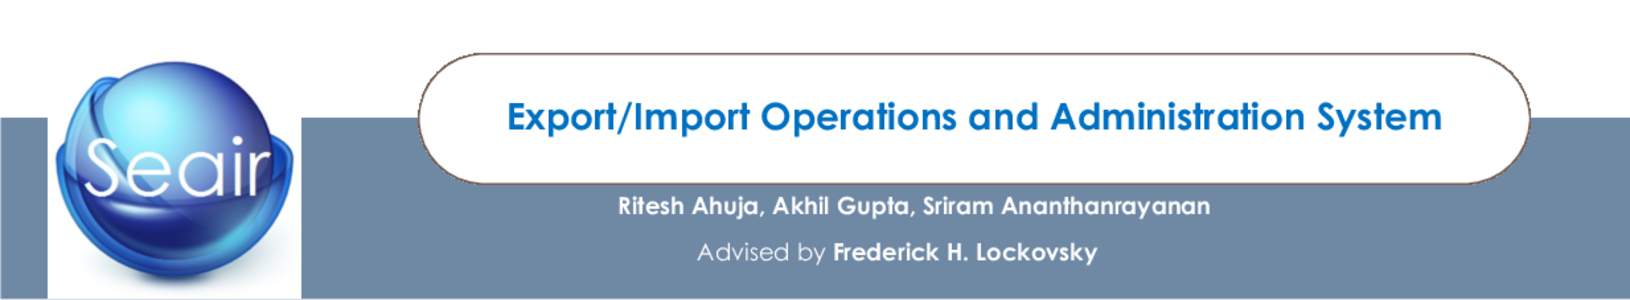 Export/Import Operations and Administration System Ritesh Ahuja, Akhil Gupta, Sriram Ananthanrayanan Advised by Frederick H. Lockovsky Introduction We developed a new database application for SriKrishna Logistics®, a